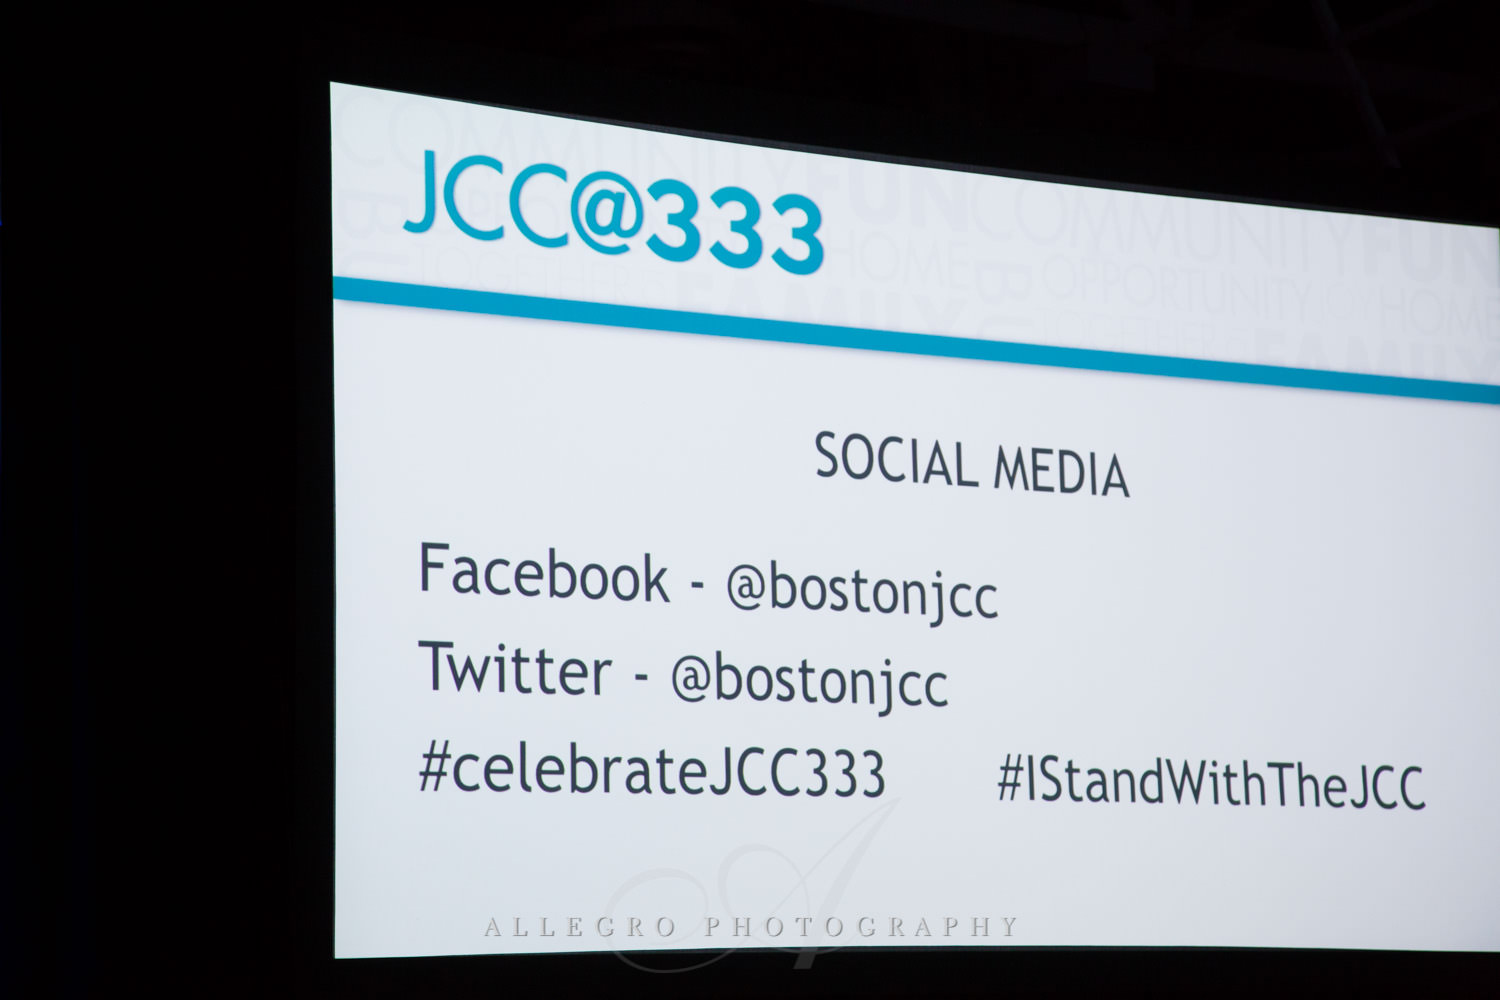 Nonprofit JCC@333 social media sites photographed by Allegro Photography